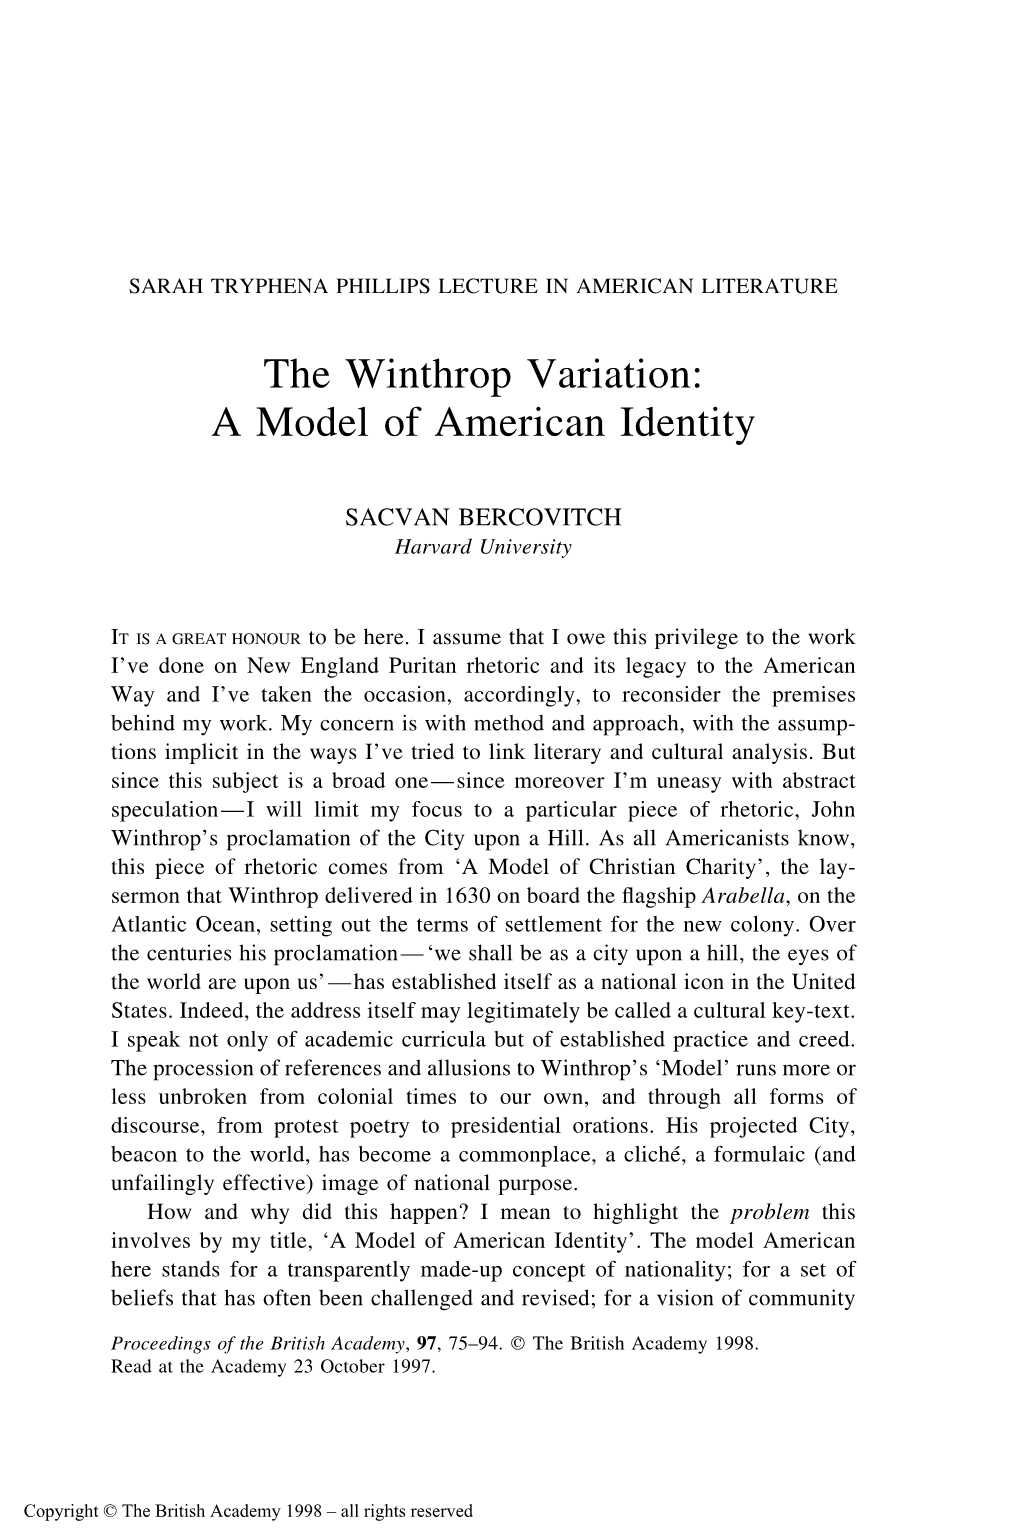 The Winthrop Variation: a Model of American Identity